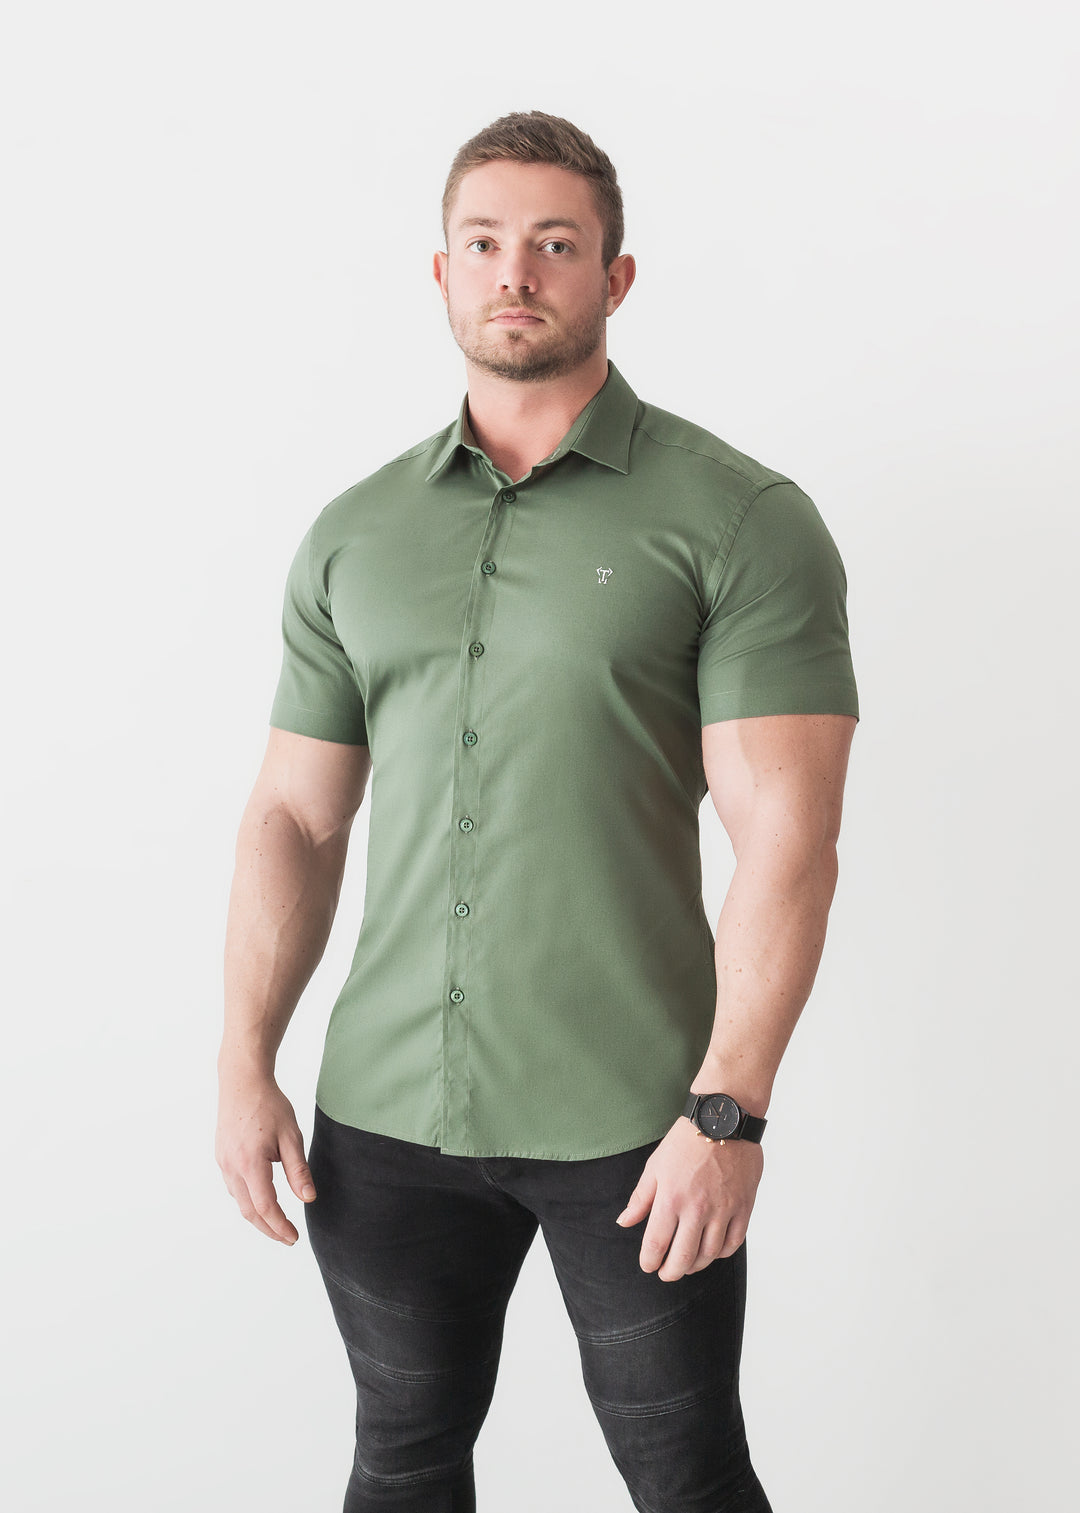 Olive shirt with a tapered fit from Tapered Menswear, highlighting the muscle-fit design for a flattering and defined look.